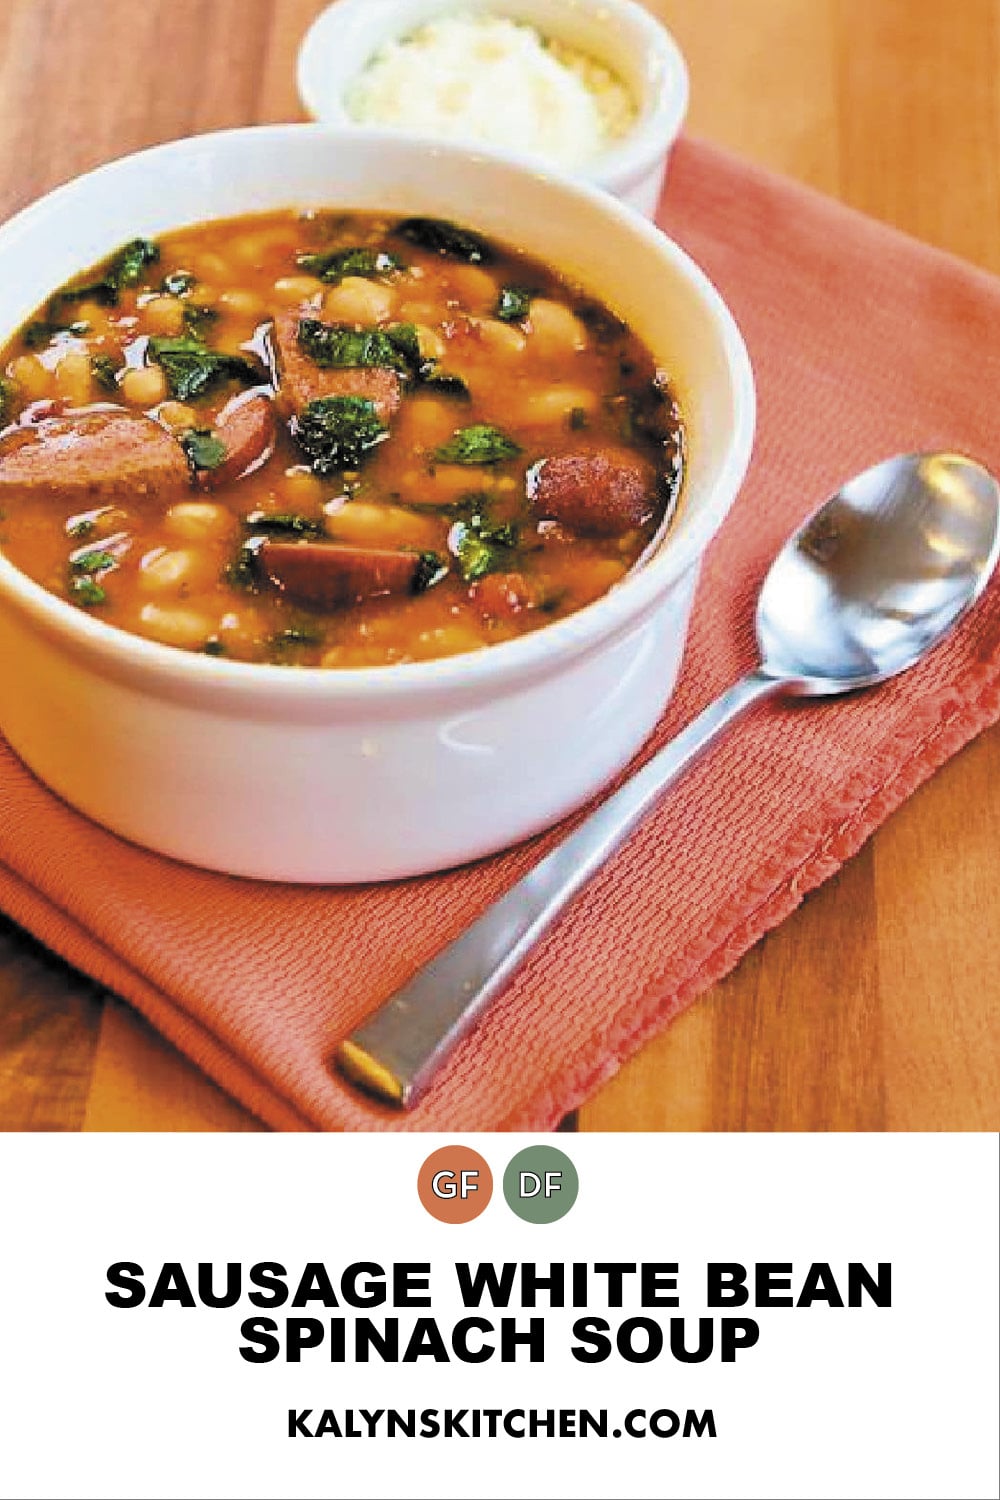 Pinterest image of Sausage White Bean Spinach Soup